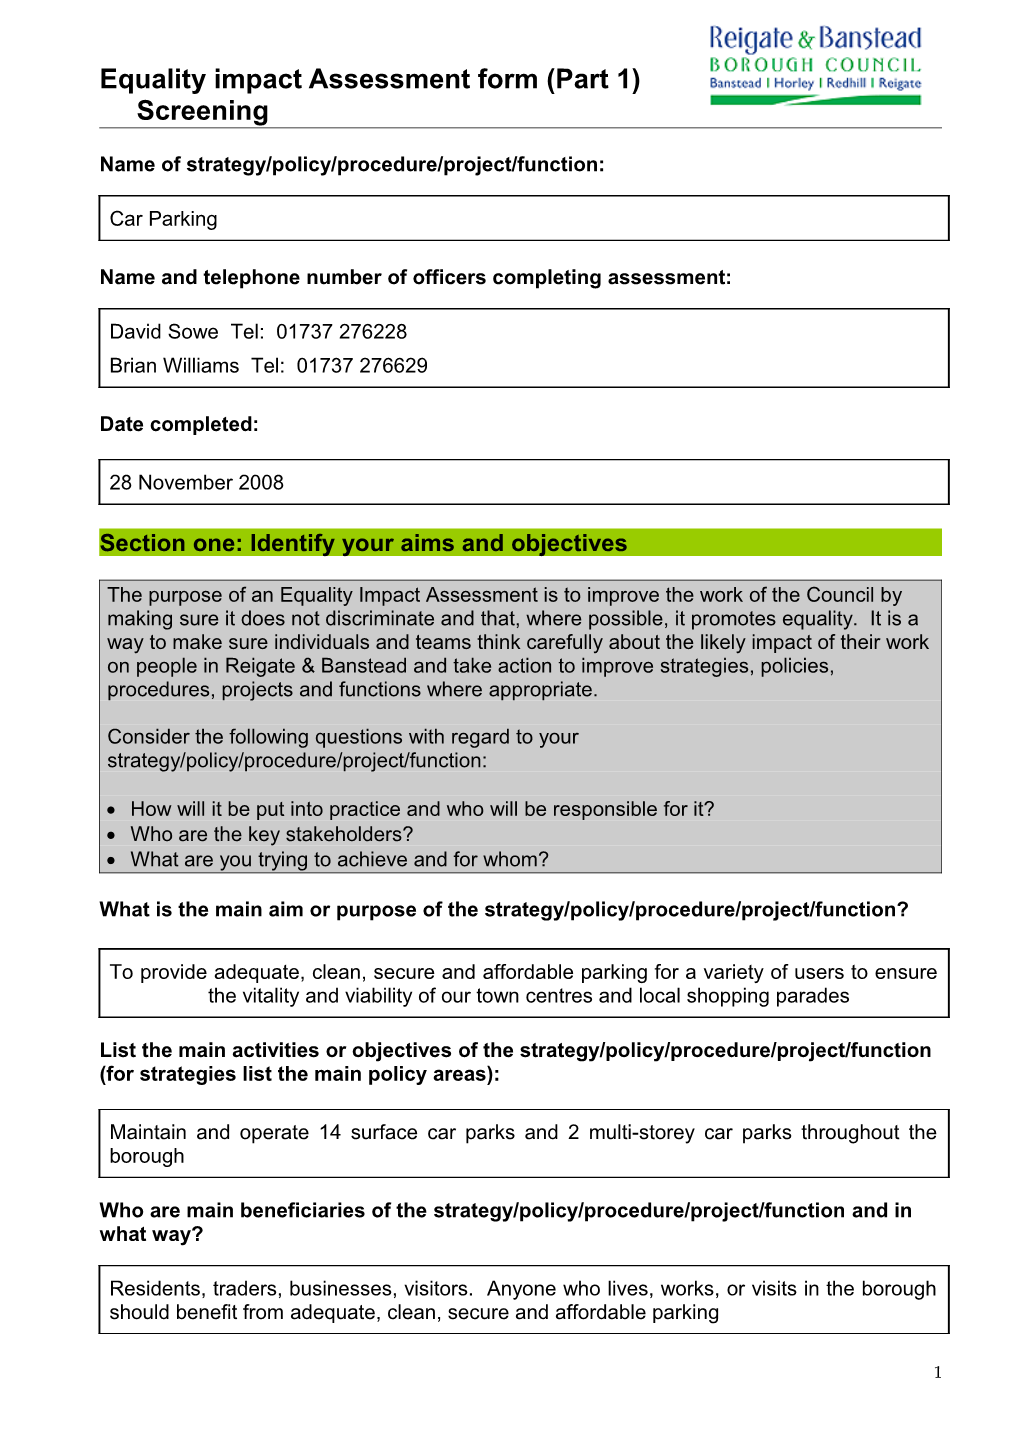 Equality Impact Assessment Form (Part 1)